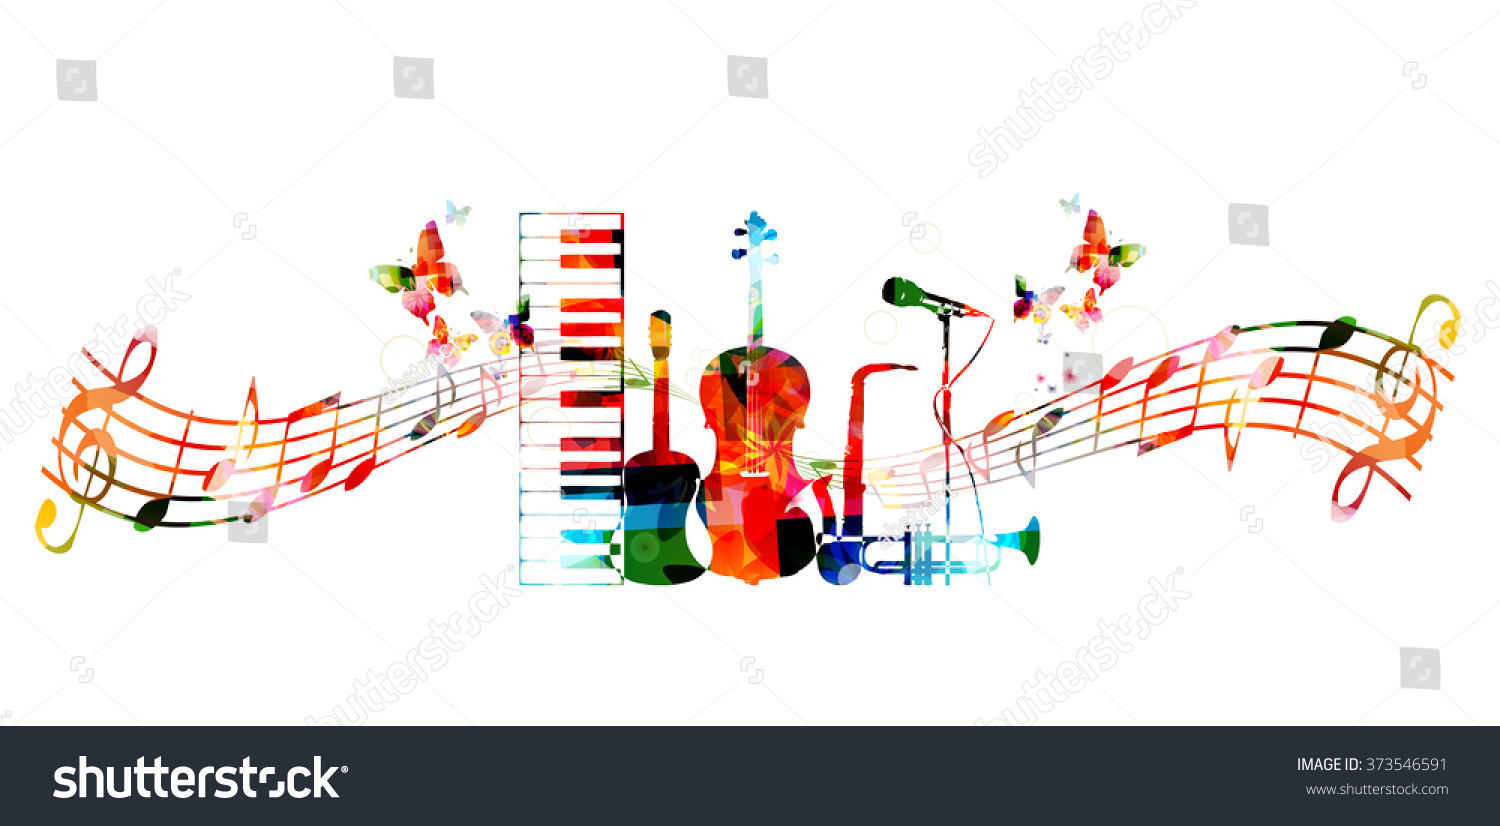 stock-vector-colorful-music-instruments-design-373546591.jpg